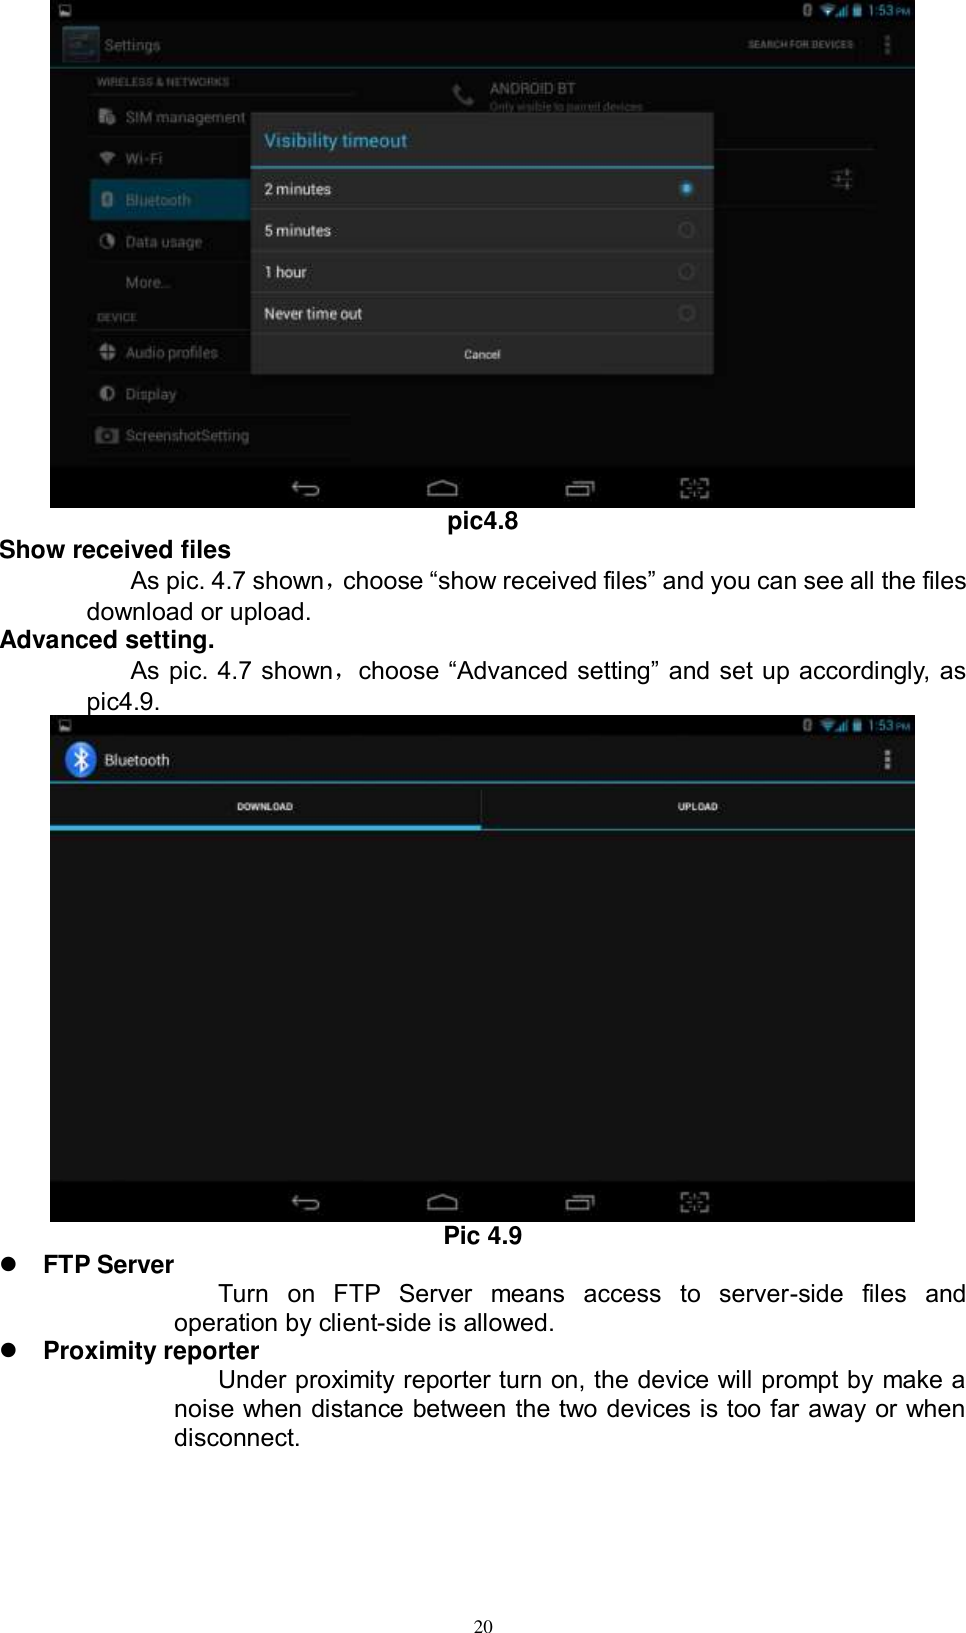      20  pic4.8 Show received files As pic. 4.7 shown，choose “show received files” and you can see all the files download or upload.   Advanced setting. As pic. 4.7 shown，choose “Advanced setting” and set up accordingly, as pic4.9.  Pic 4.9  FTP Server  Turn  on  FTP  Server  means  access  to  server-side  files  and operation by client-side is allowed.  Proximity reporter Under proximity reporter turn on, the device will prompt by make a noise when distance between the two devices is too far away or when disconnect. 